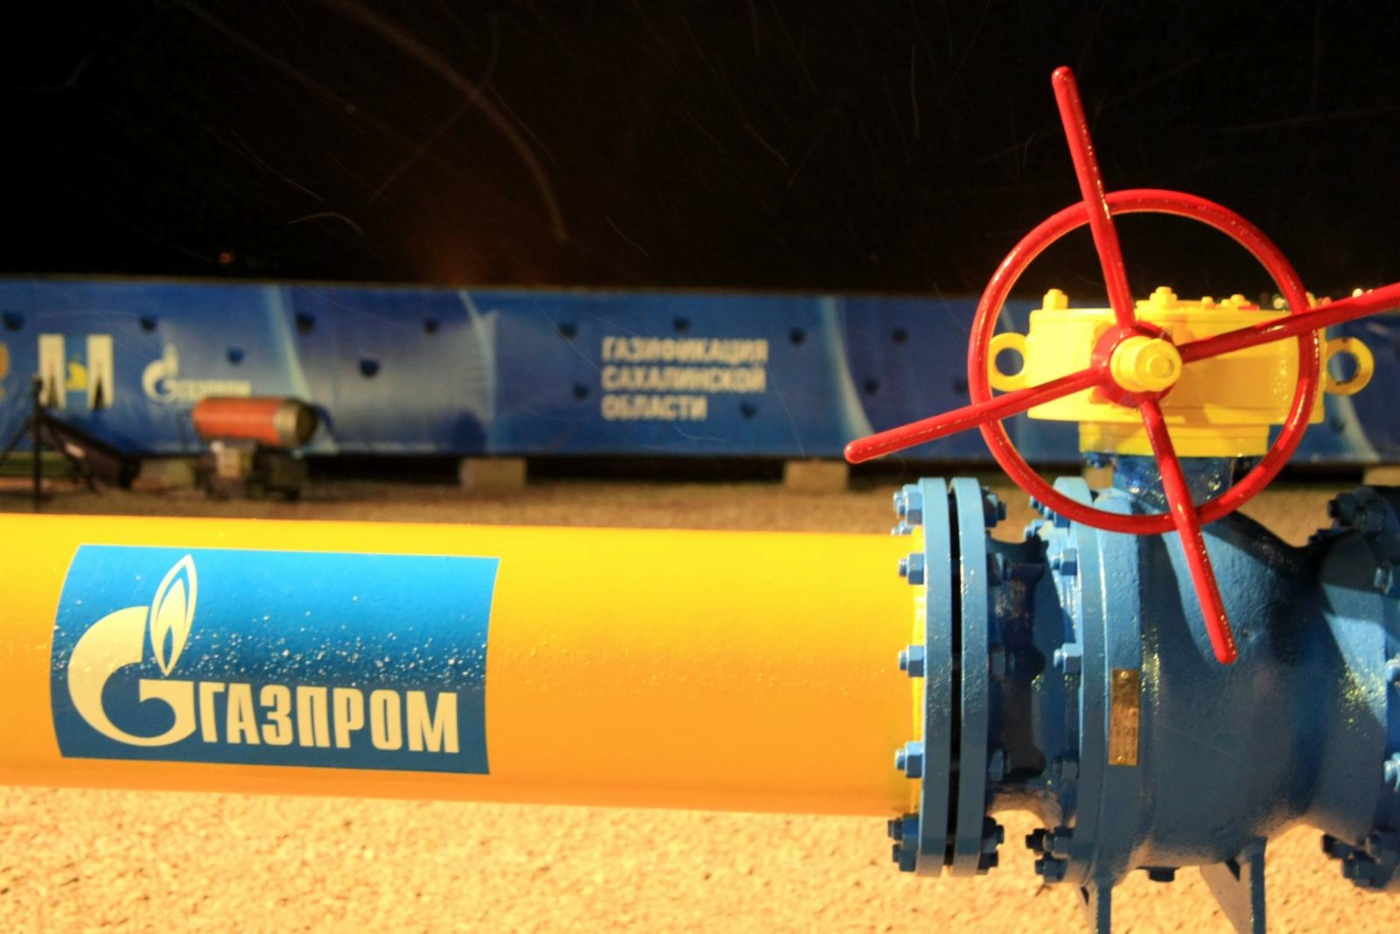 Gazprom's year-to-date natural gas production edges up